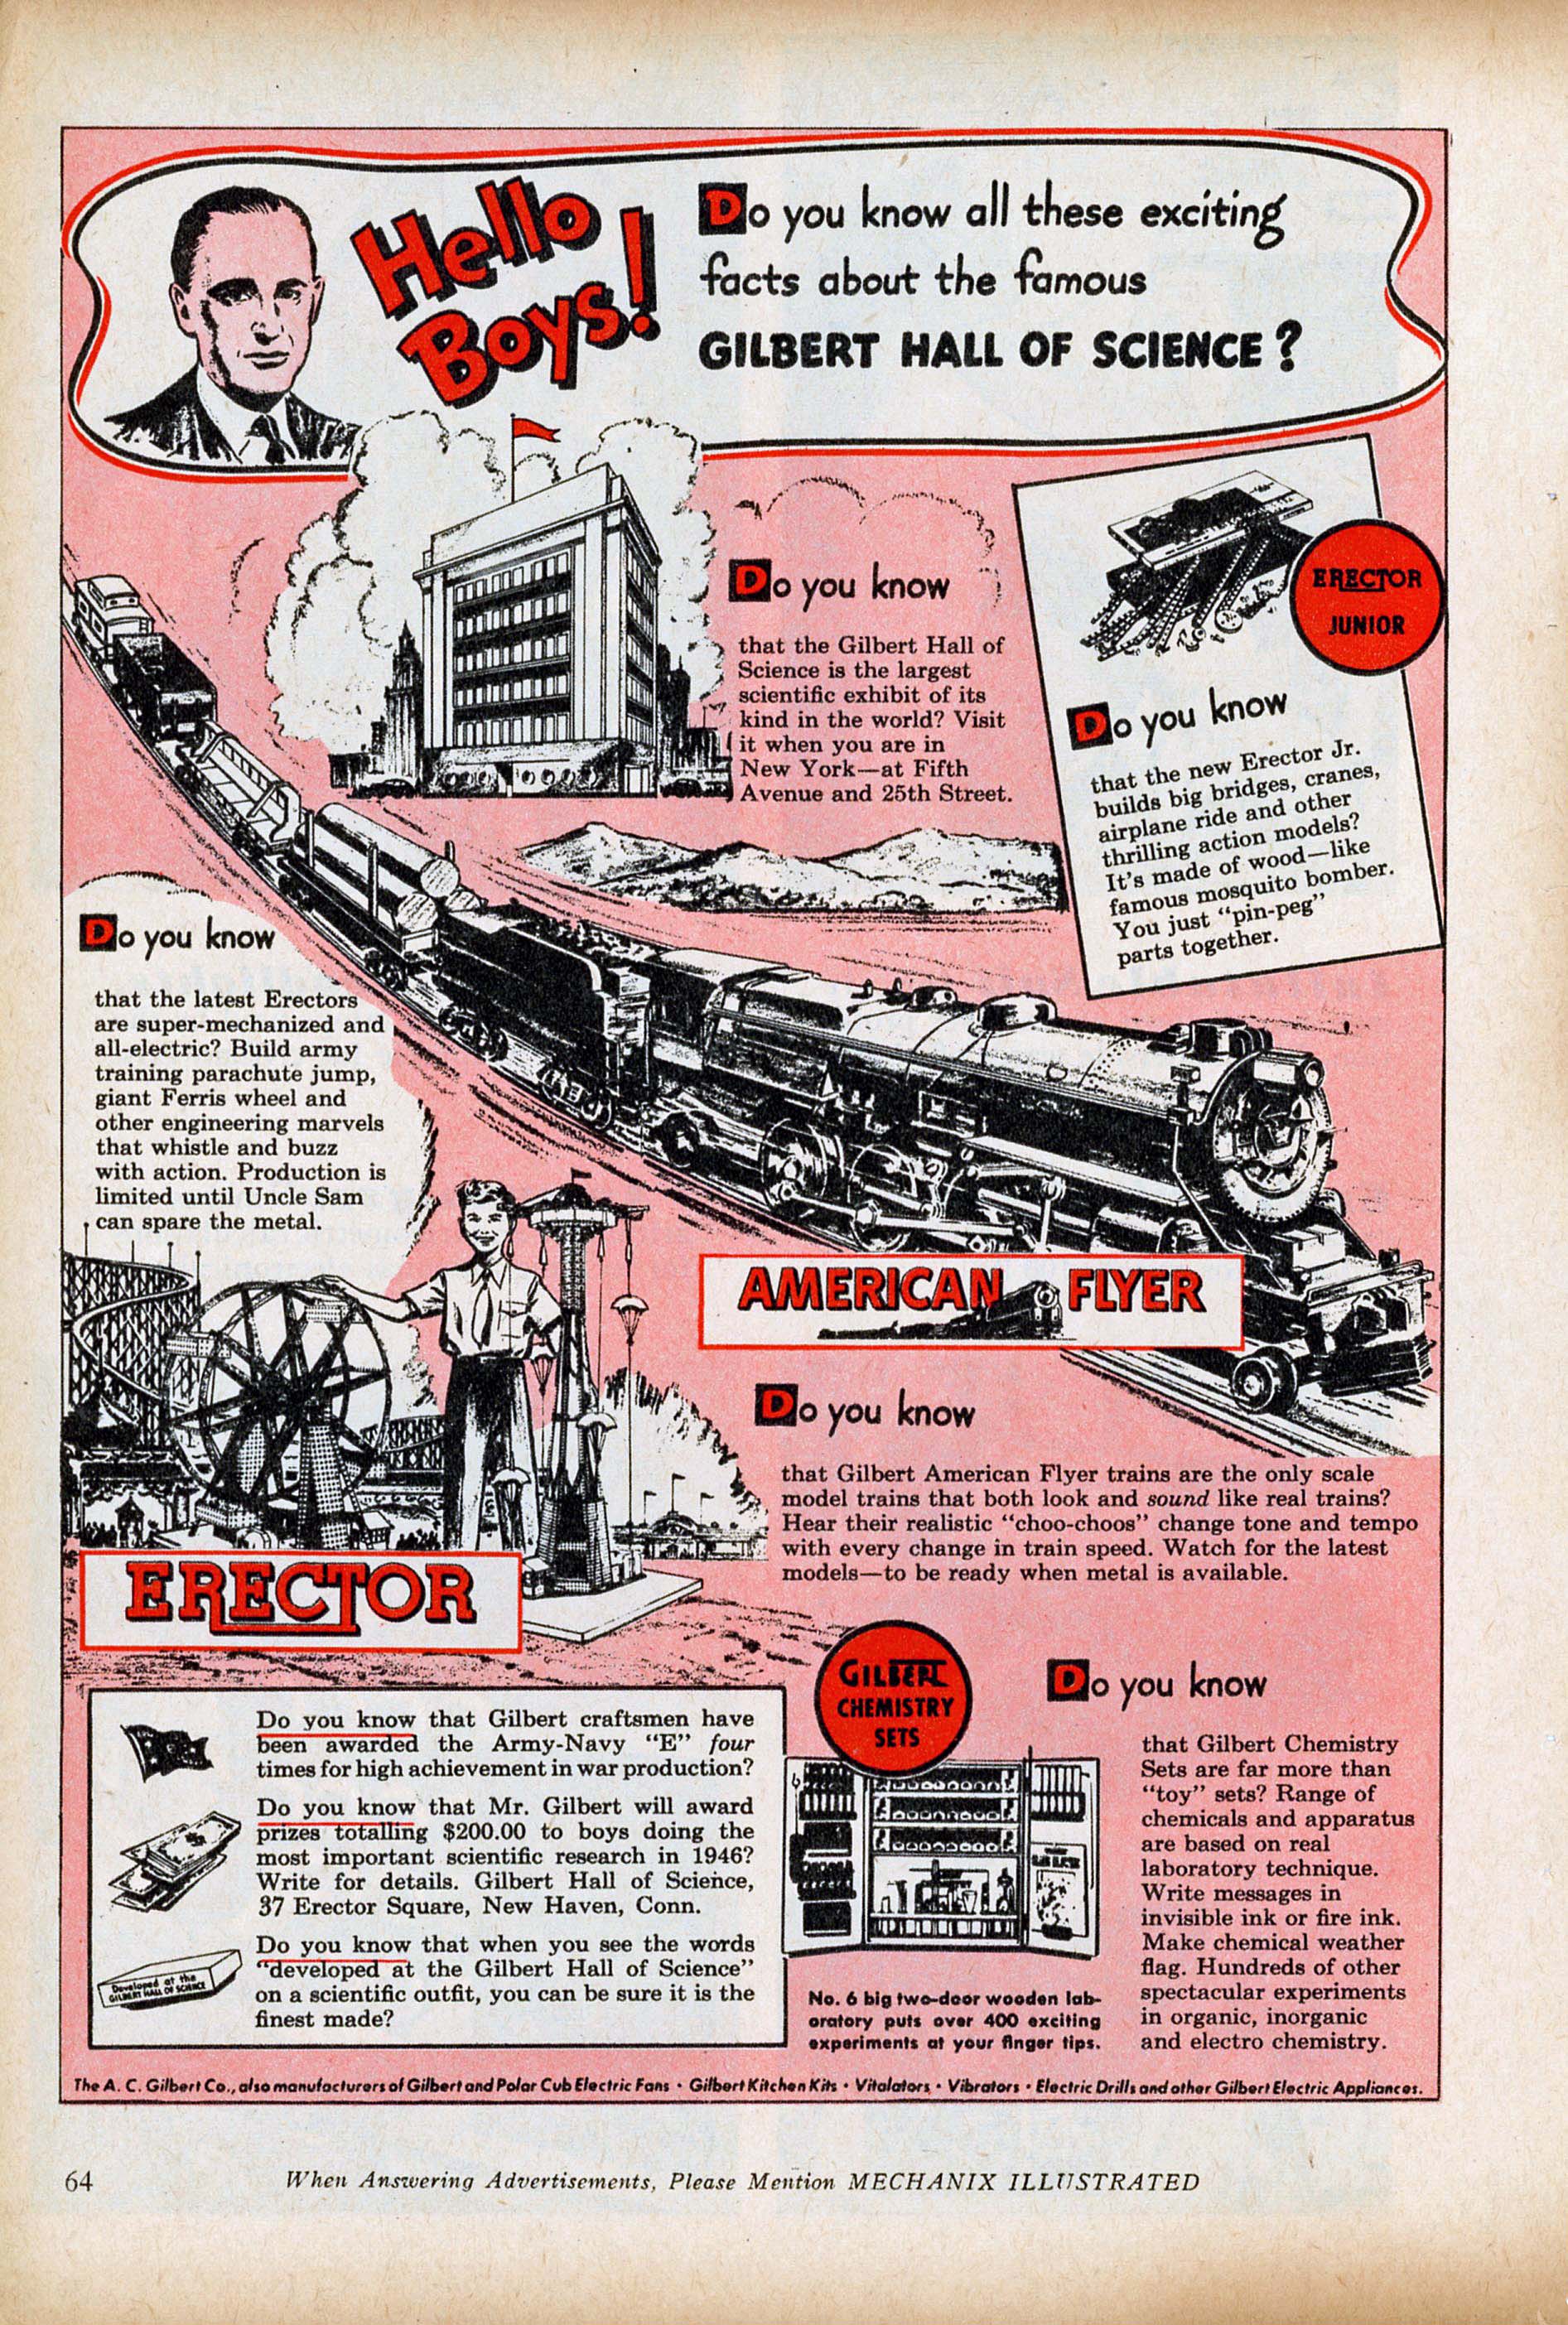 Mechanix Illustrated possibly 1946